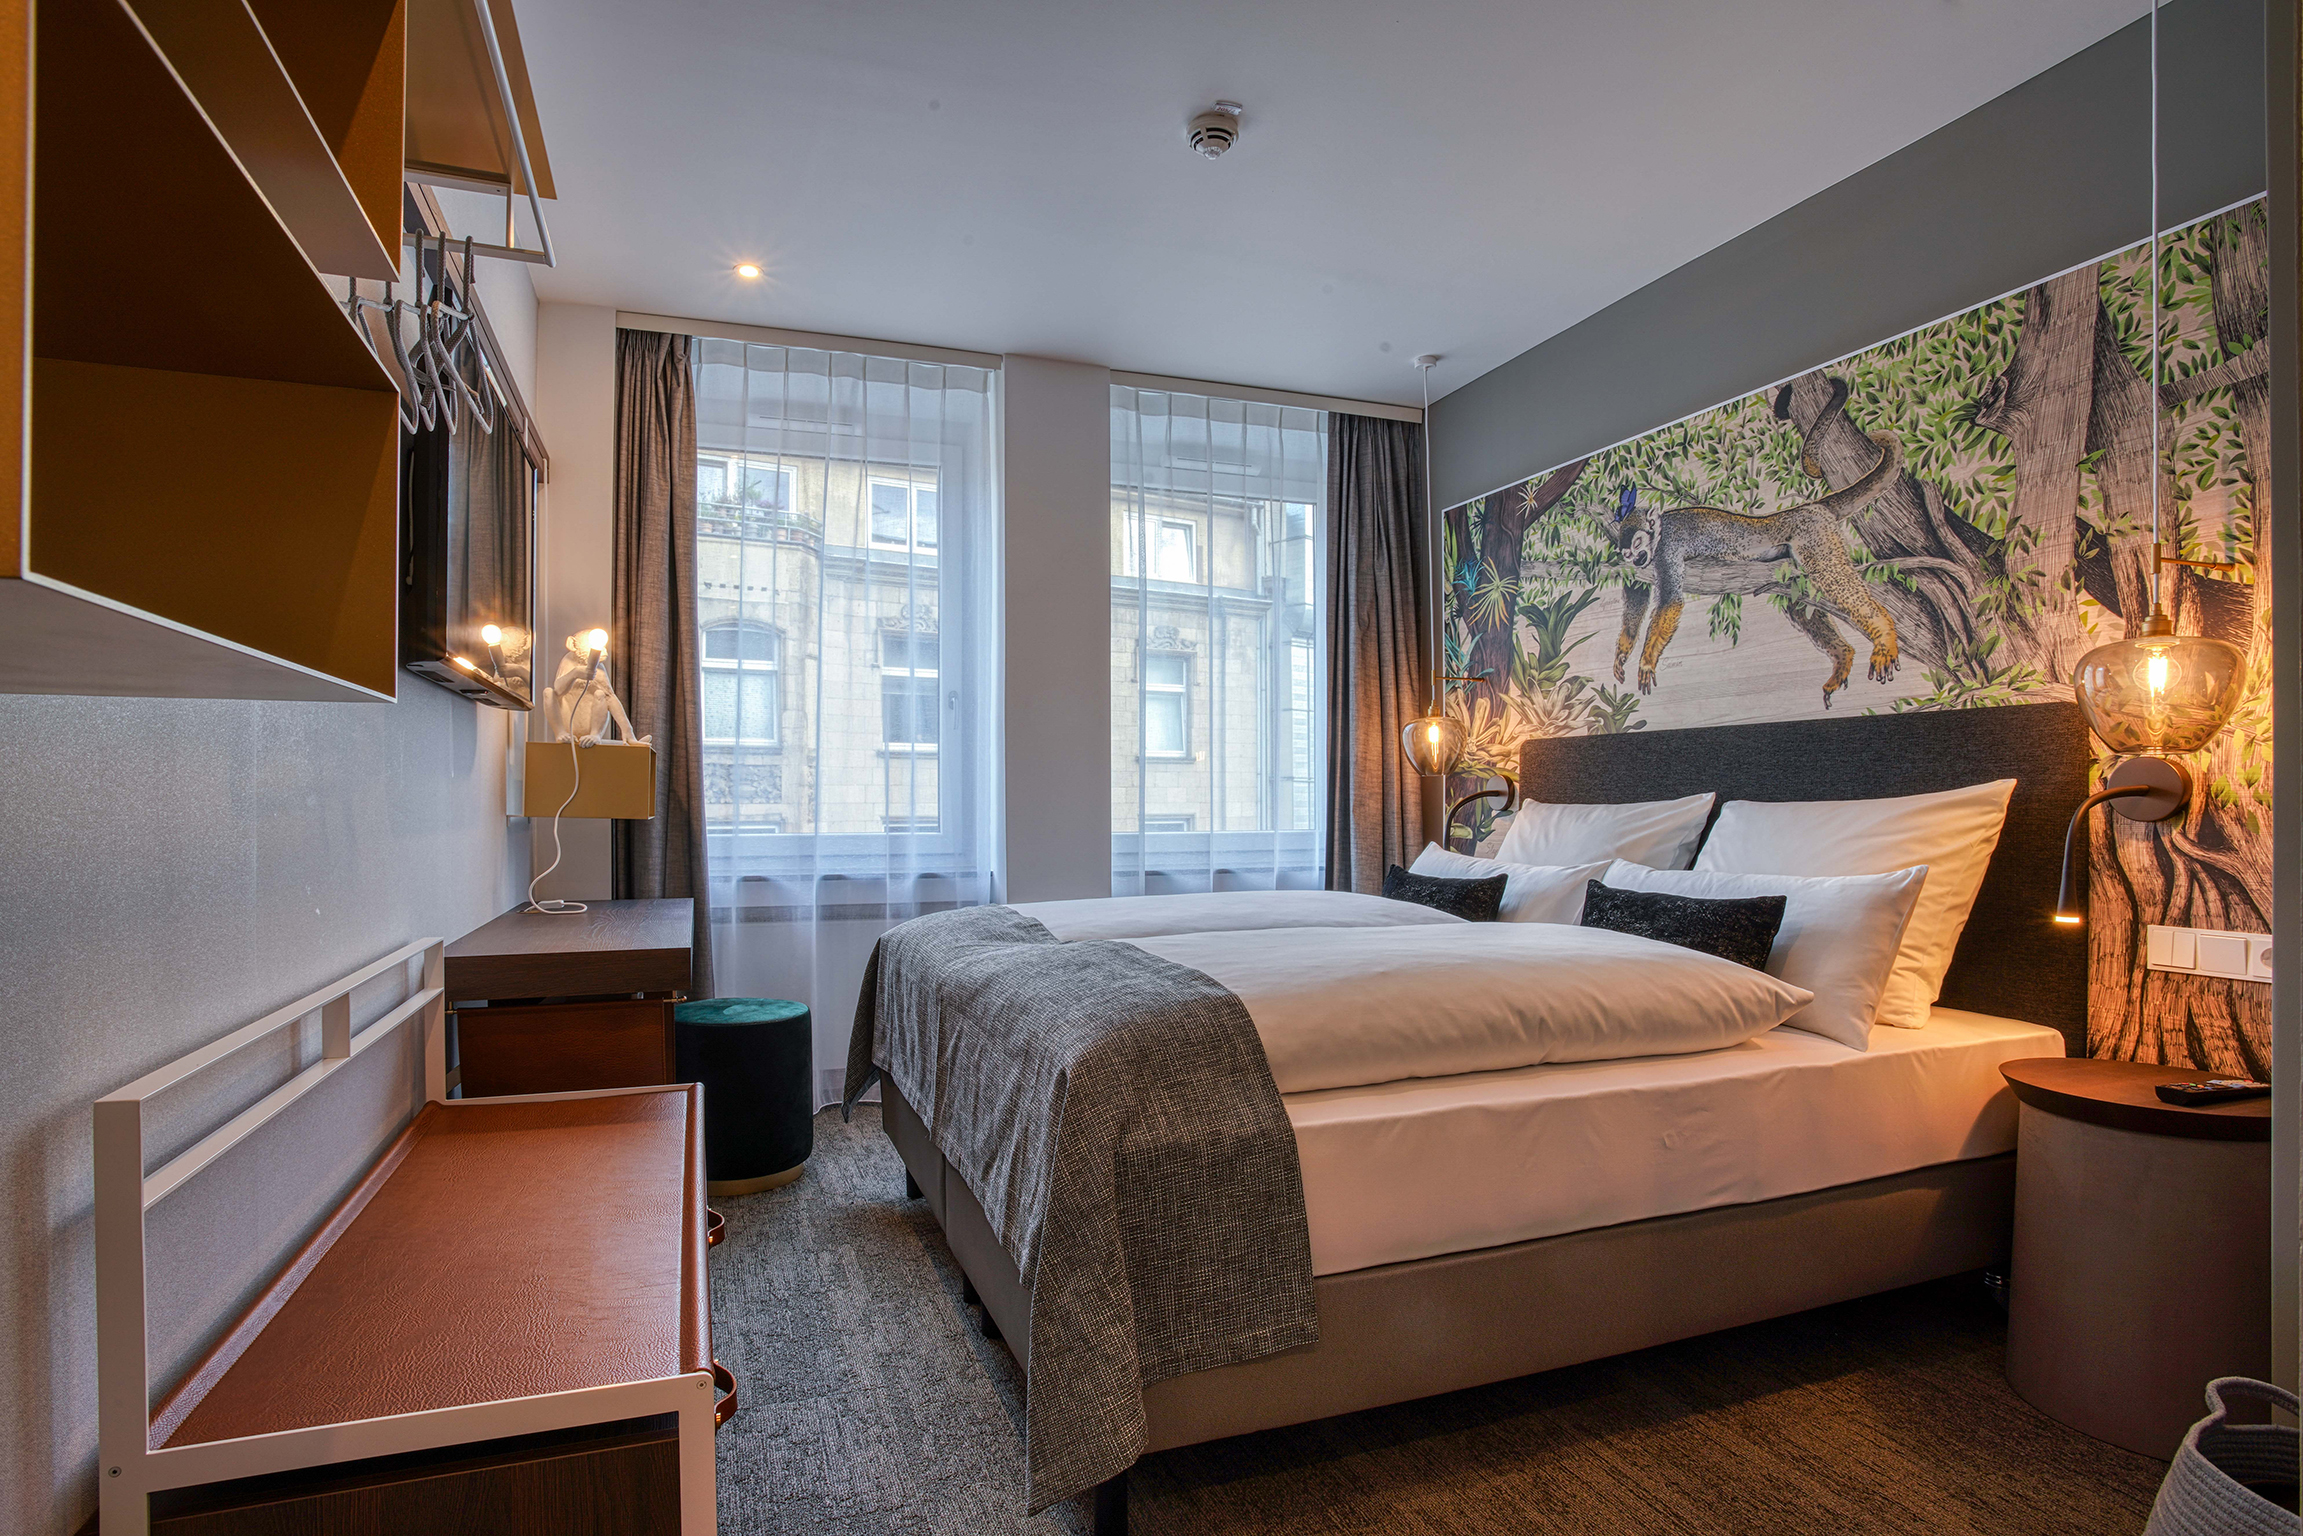 NinetyNine Hotel Amsterdam Airport <br/>69.00 ew <br/> <a href='http://vakantieoplossing.nl/outpage/?id=ec2a78fd6e2564e1a0efd0dd2f7efcf1' target='_blank'>View Details</a>